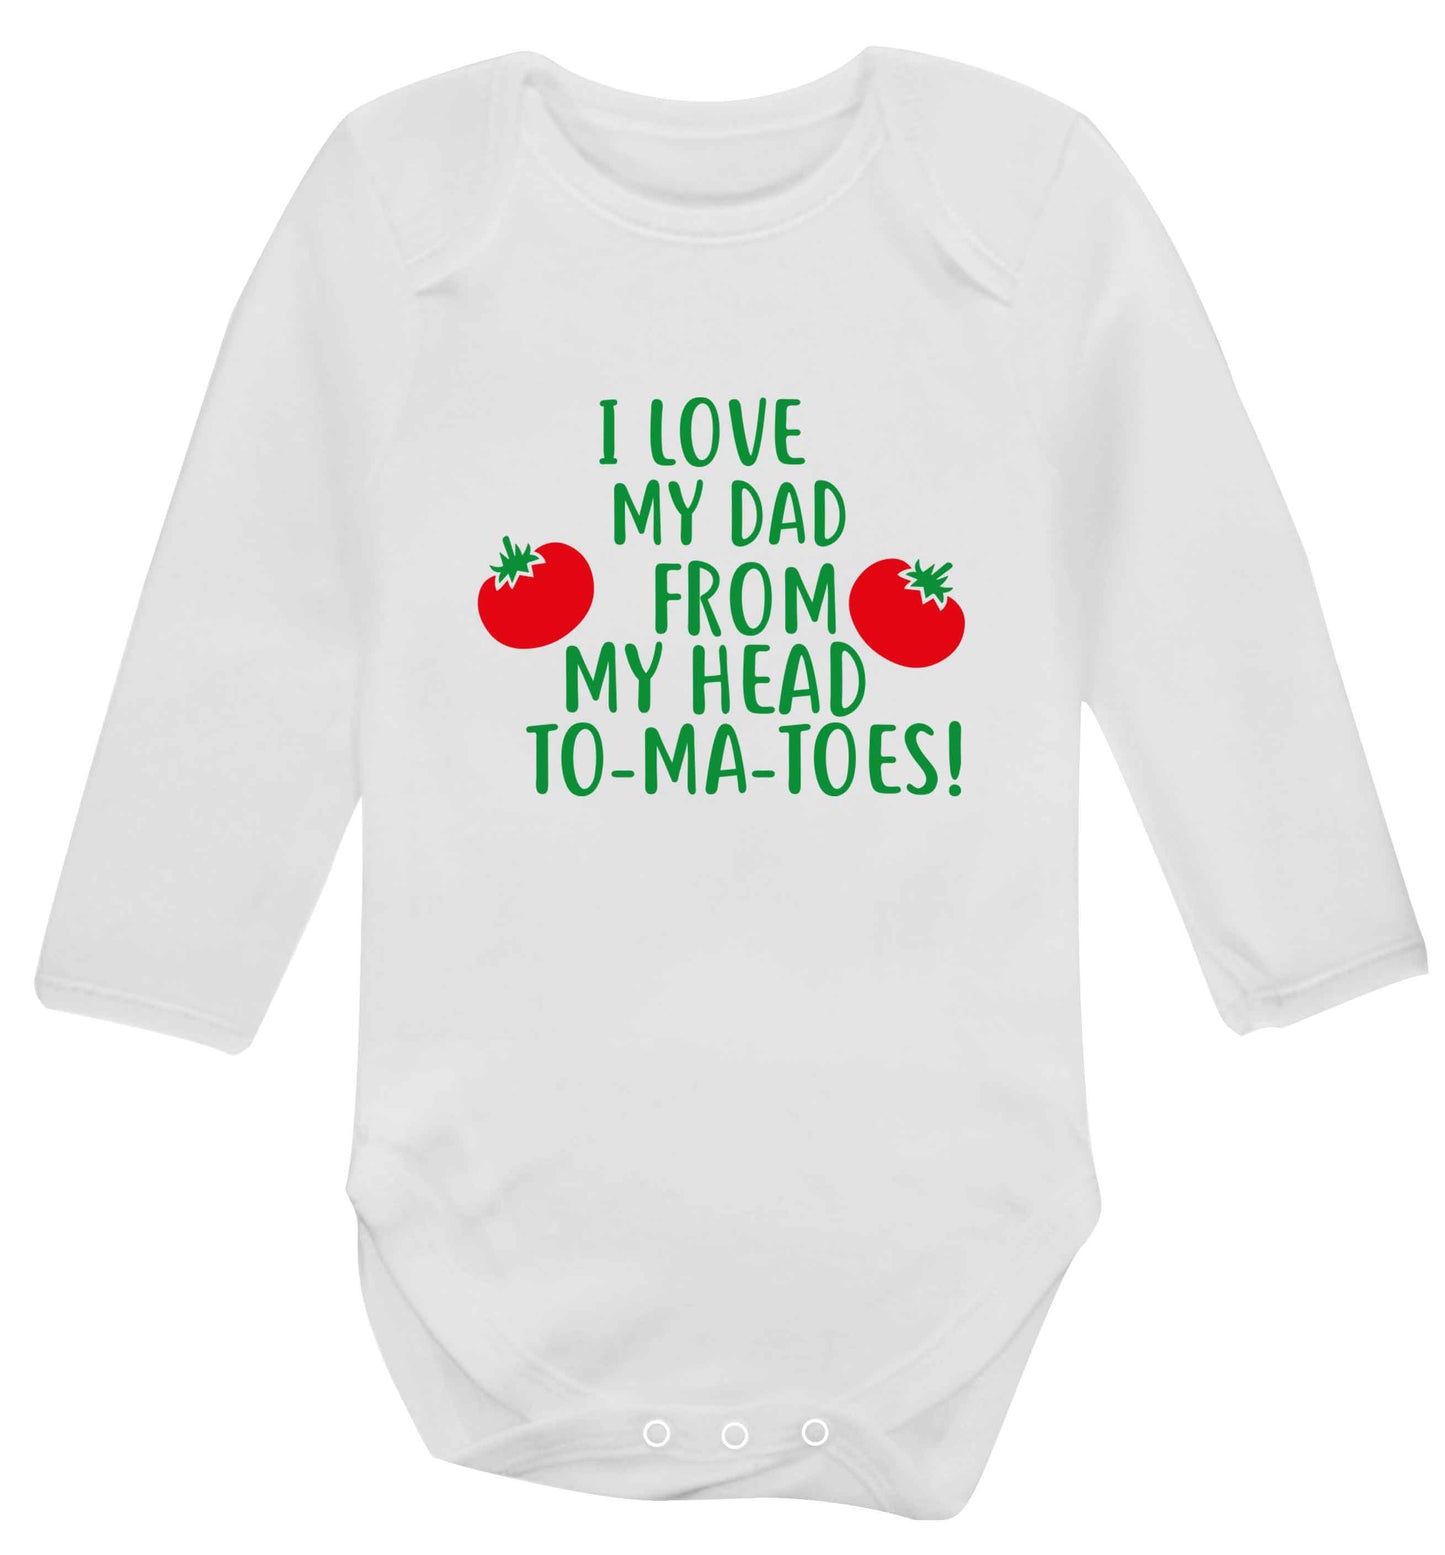 I love my dad from my head to-ma-toes baby vest long sleeved white 6-12 months